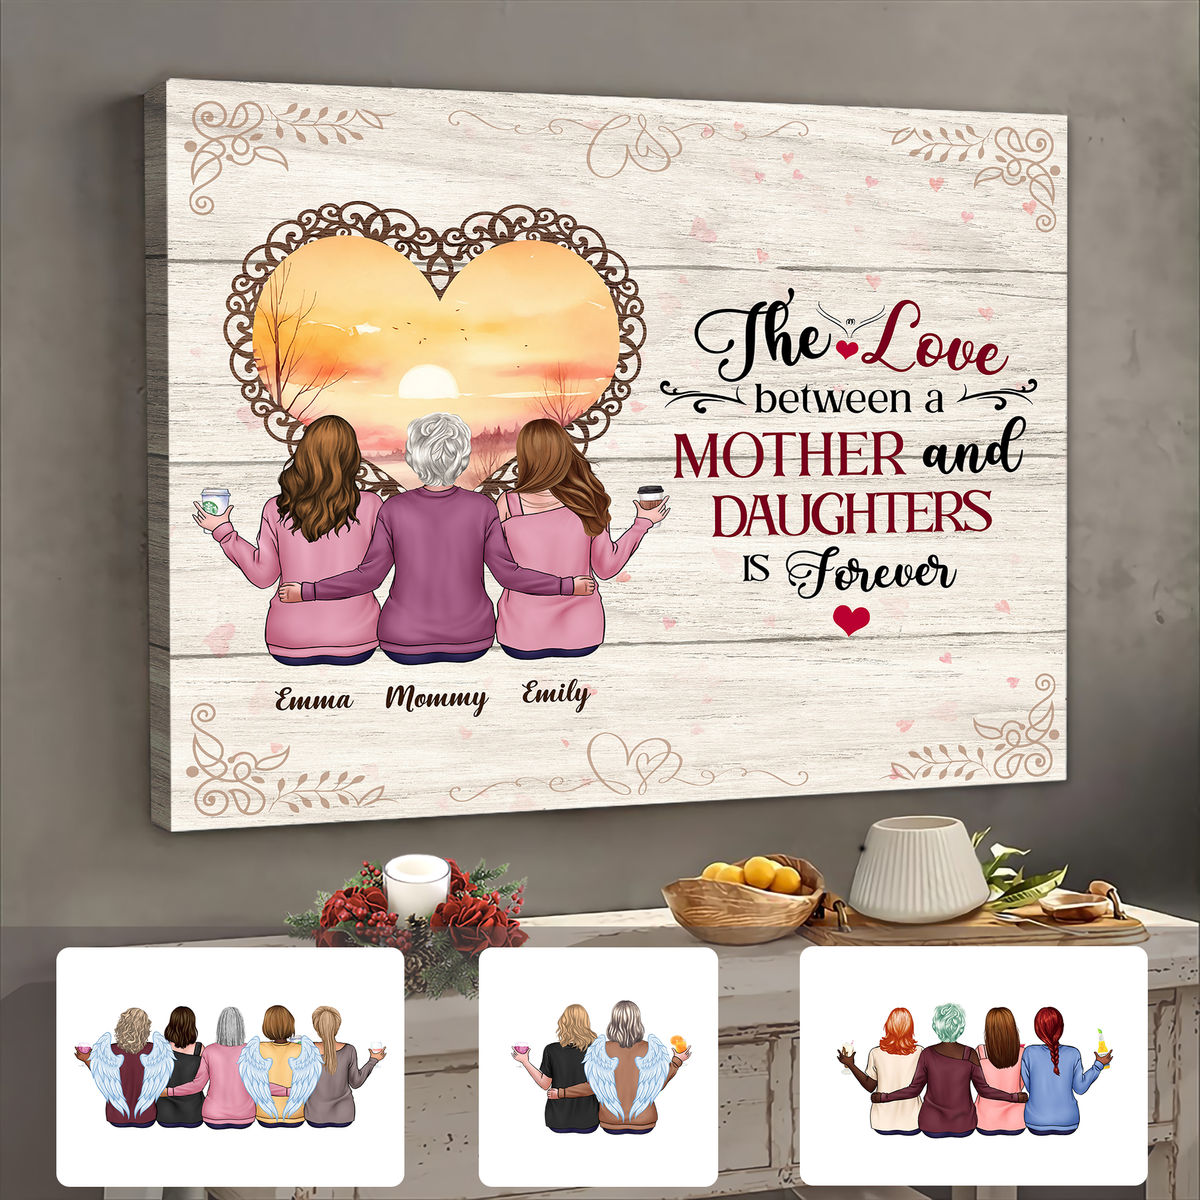 Mother & Daughters Canvas - The Love between a Mother and Daughters is Forever N1